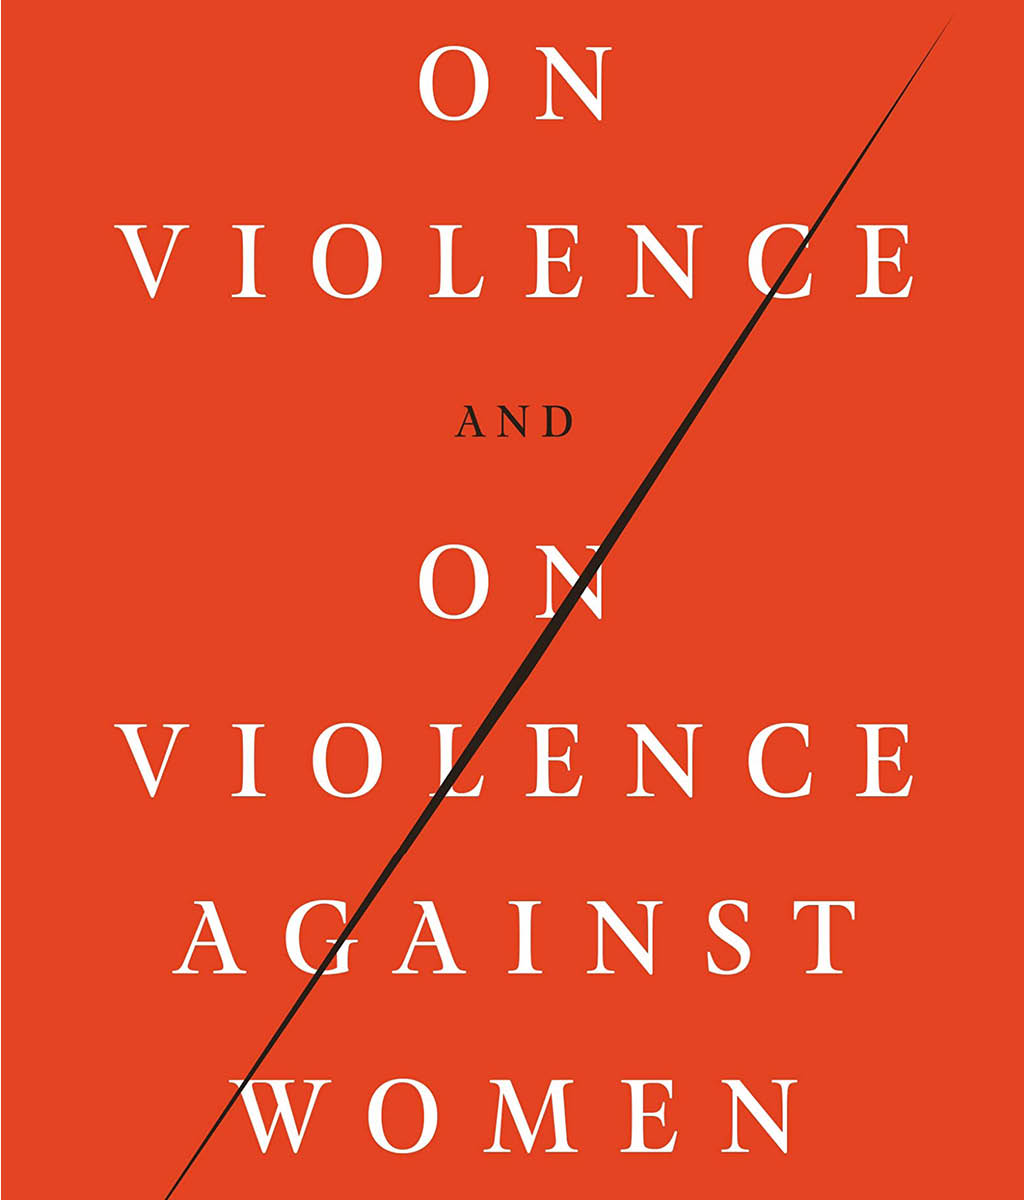 On Violence and On Violence Against Women by Jacqueline Rose